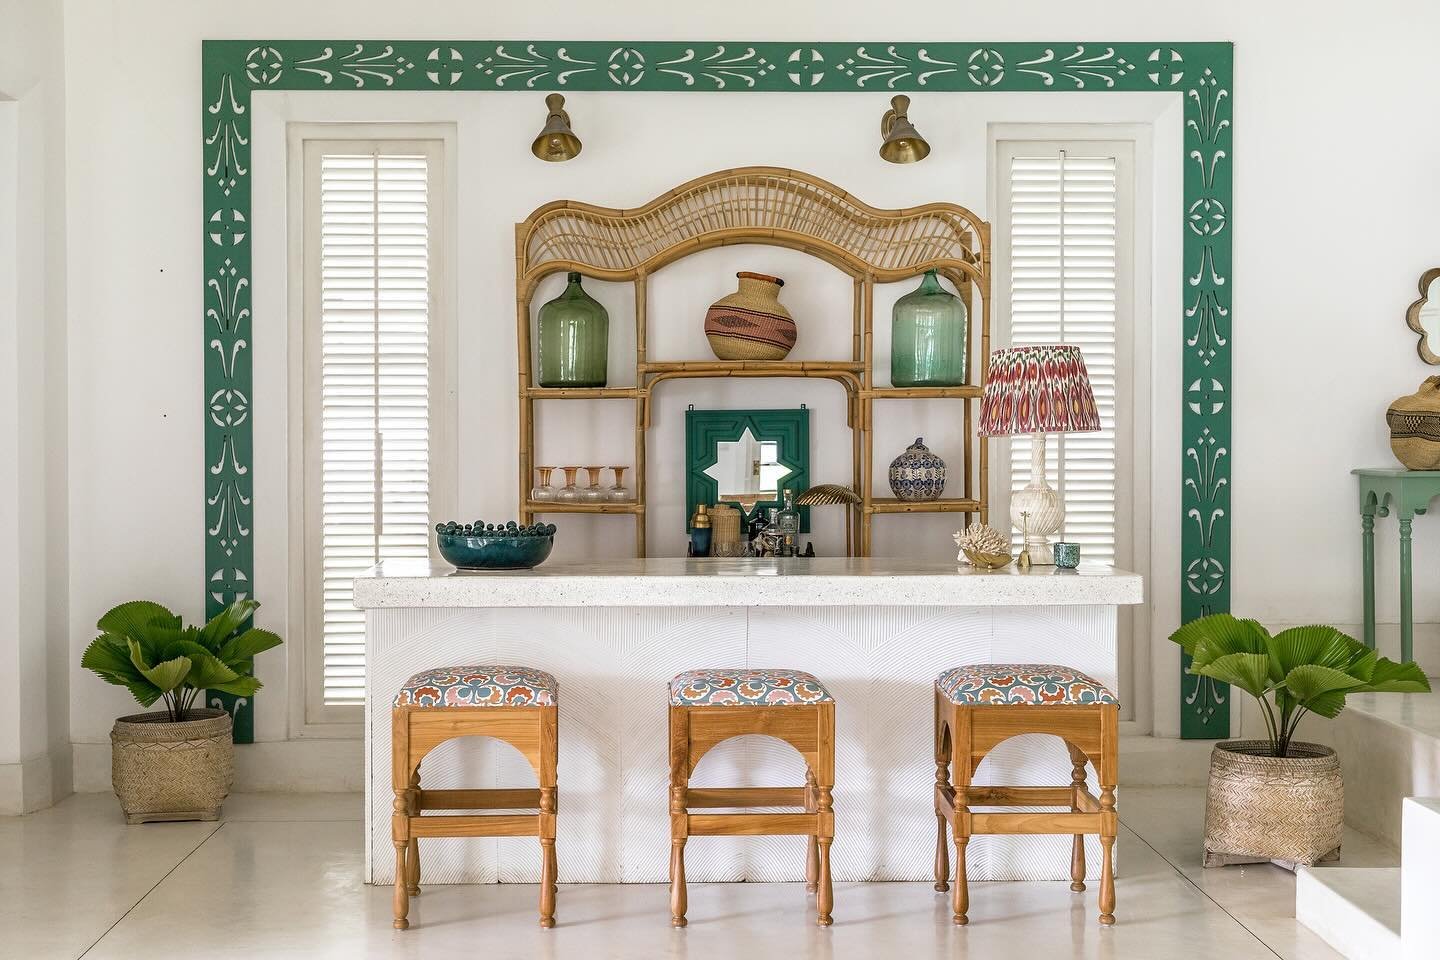 Here&rsquo;s where we wish we were spending our Friday night @braganzahouse in Sri Lanka🌴💫🐆The relaxed bar we designed in the sunken sitting room becomes a fun gathering place for friends and families. The painted green pretty fretwork was inspire